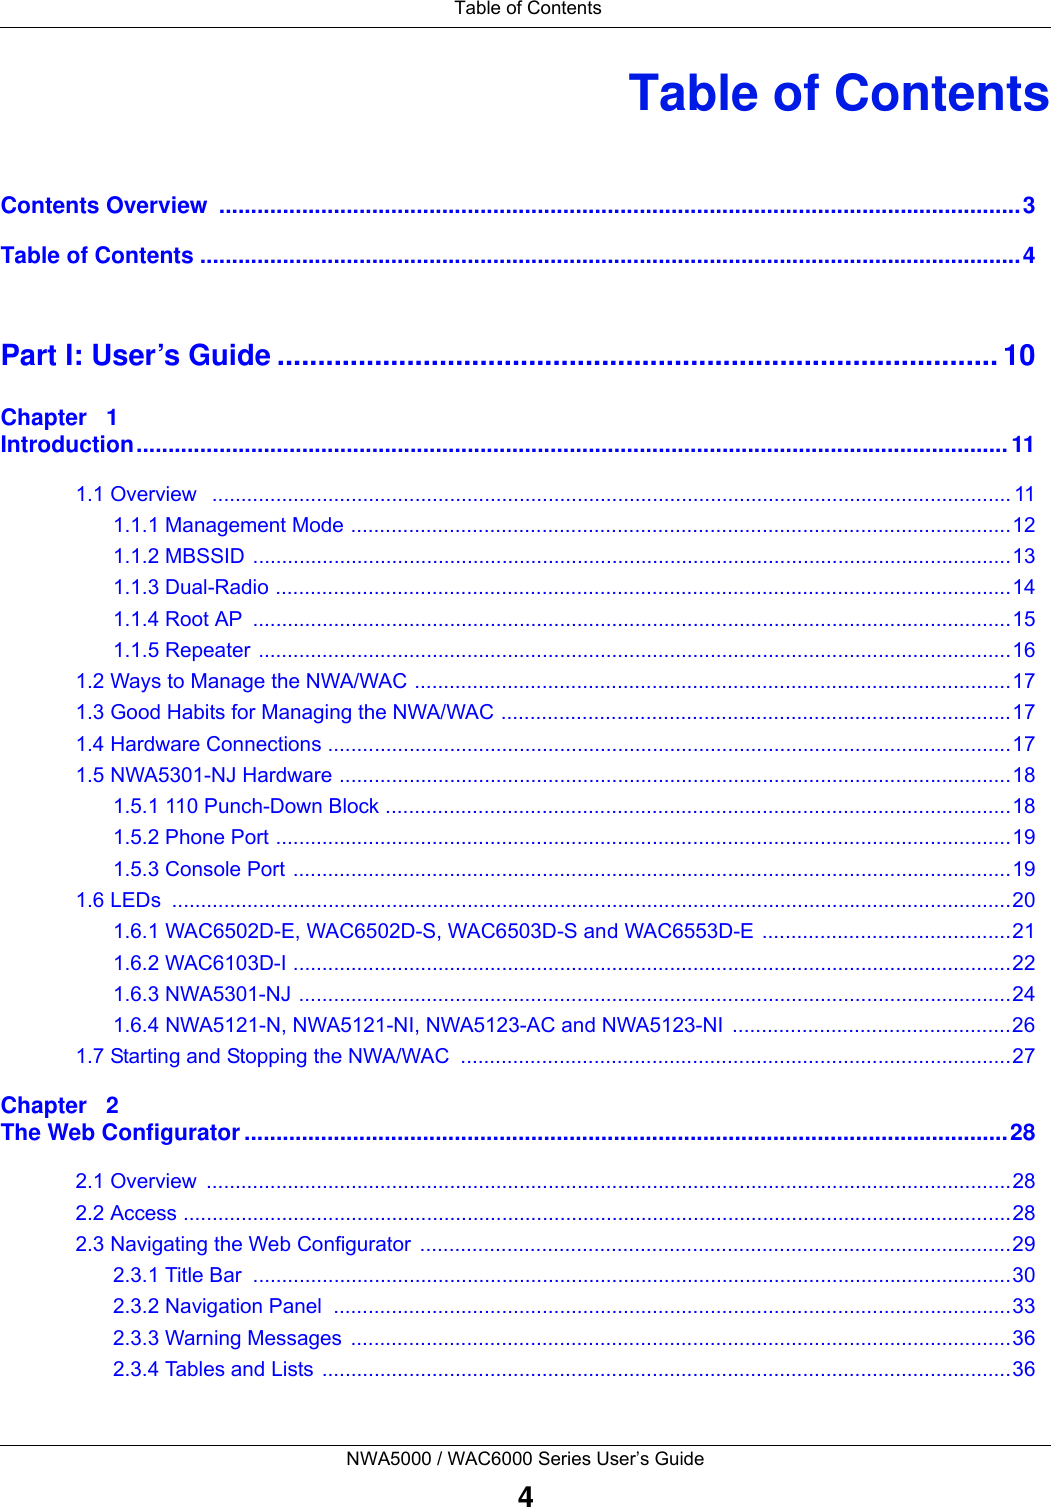 Table of ContentsNWA5000 / WAC6000 Series User’s Guide4Table of ContentsContents Overview  ..............................................................................................................................3Table of Contents .................................................................................................................................4Part I: User’s Guide ......................................................................................... 10Chapter   1Introduction.........................................................................................................................................111.1 Overview   .......................................................................................................................................... 111.1.1 Management Mode ..................................................................................................................121.1.2 MBSSID ...................................................................................................................................131.1.3 Dual-Radio ...............................................................................................................................141.1.4 Root AP  ...................................................................................................................................151.1.5 Repeater ..................................................................................................................................161.2 Ways to Manage the NWA/WAC .......................................................................................................171.3 Good Habits for Managing the NWA/WAC ........................................................................................171.4 Hardware Connections ......................................................................................................................171.5 NWA5301-NJ Hardware ....................................................................................................................181.5.1 110 Punch-Down Block ............................................................................................................181.5.2 Phone Port ...............................................................................................................................191.5.3 Console Port ............................................................................................................................191.6 LEDs  .................................................................................................................................................201.6.1 WAC6502D-E, WAC6502D-S, WAC6503D-S and WAC6553D-E ...........................................211.6.2 WAC6103D-I ............................................................................................................................221.6.3 NWA5301-NJ ...........................................................................................................................241.6.4 NWA5121-N, NWA5121-NI, NWA5123-AC and NWA5123-NI  ................................................261.7 Starting and Stopping the NWA/WAC  ...............................................................................................27Chapter   2The Web Configurator ........................................................................................................................282.1 Overview  ...........................................................................................................................................282.2 Access ...............................................................................................................................................282.3 Navigating the Web Configurator  ......................................................................................................292.3.1 Title Bar  ...................................................................................................................................302.3.2 Navigation Panel  .....................................................................................................................332.3.3 Warning Messages  ..................................................................................................................362.3.4 Tables and Lists .......................................................................................................................36